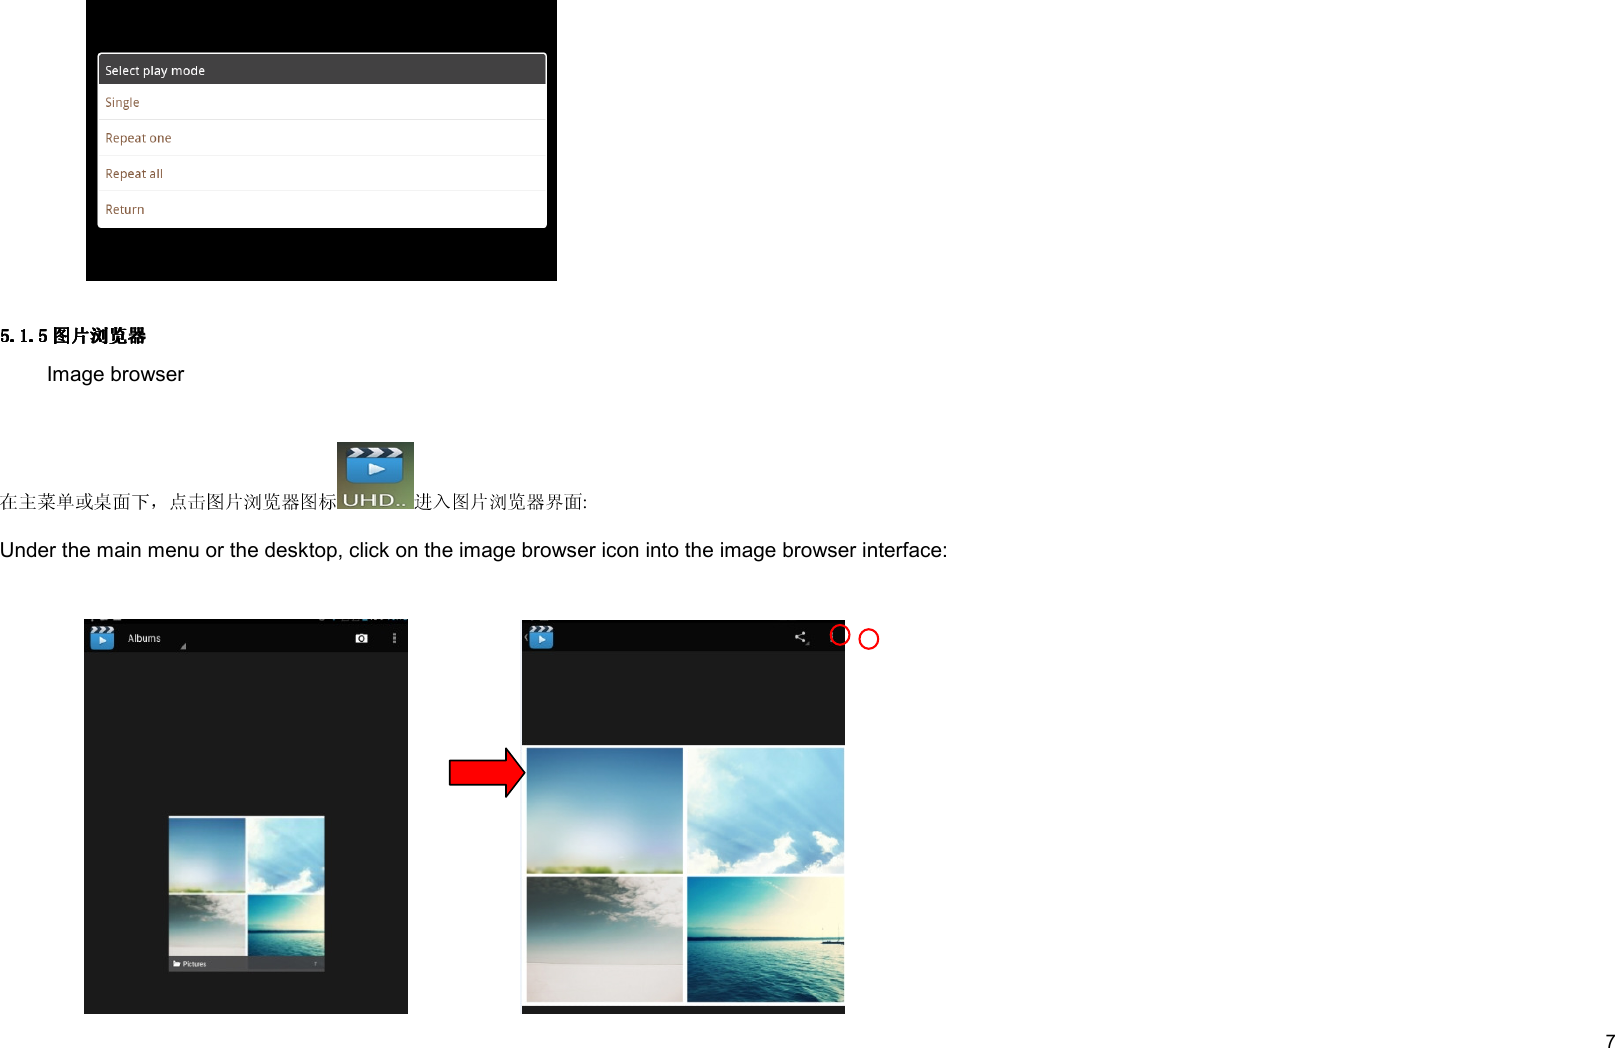     7          Image browser : Under the main menu or the desktop, click on the image browser icon into the image browser interface: 